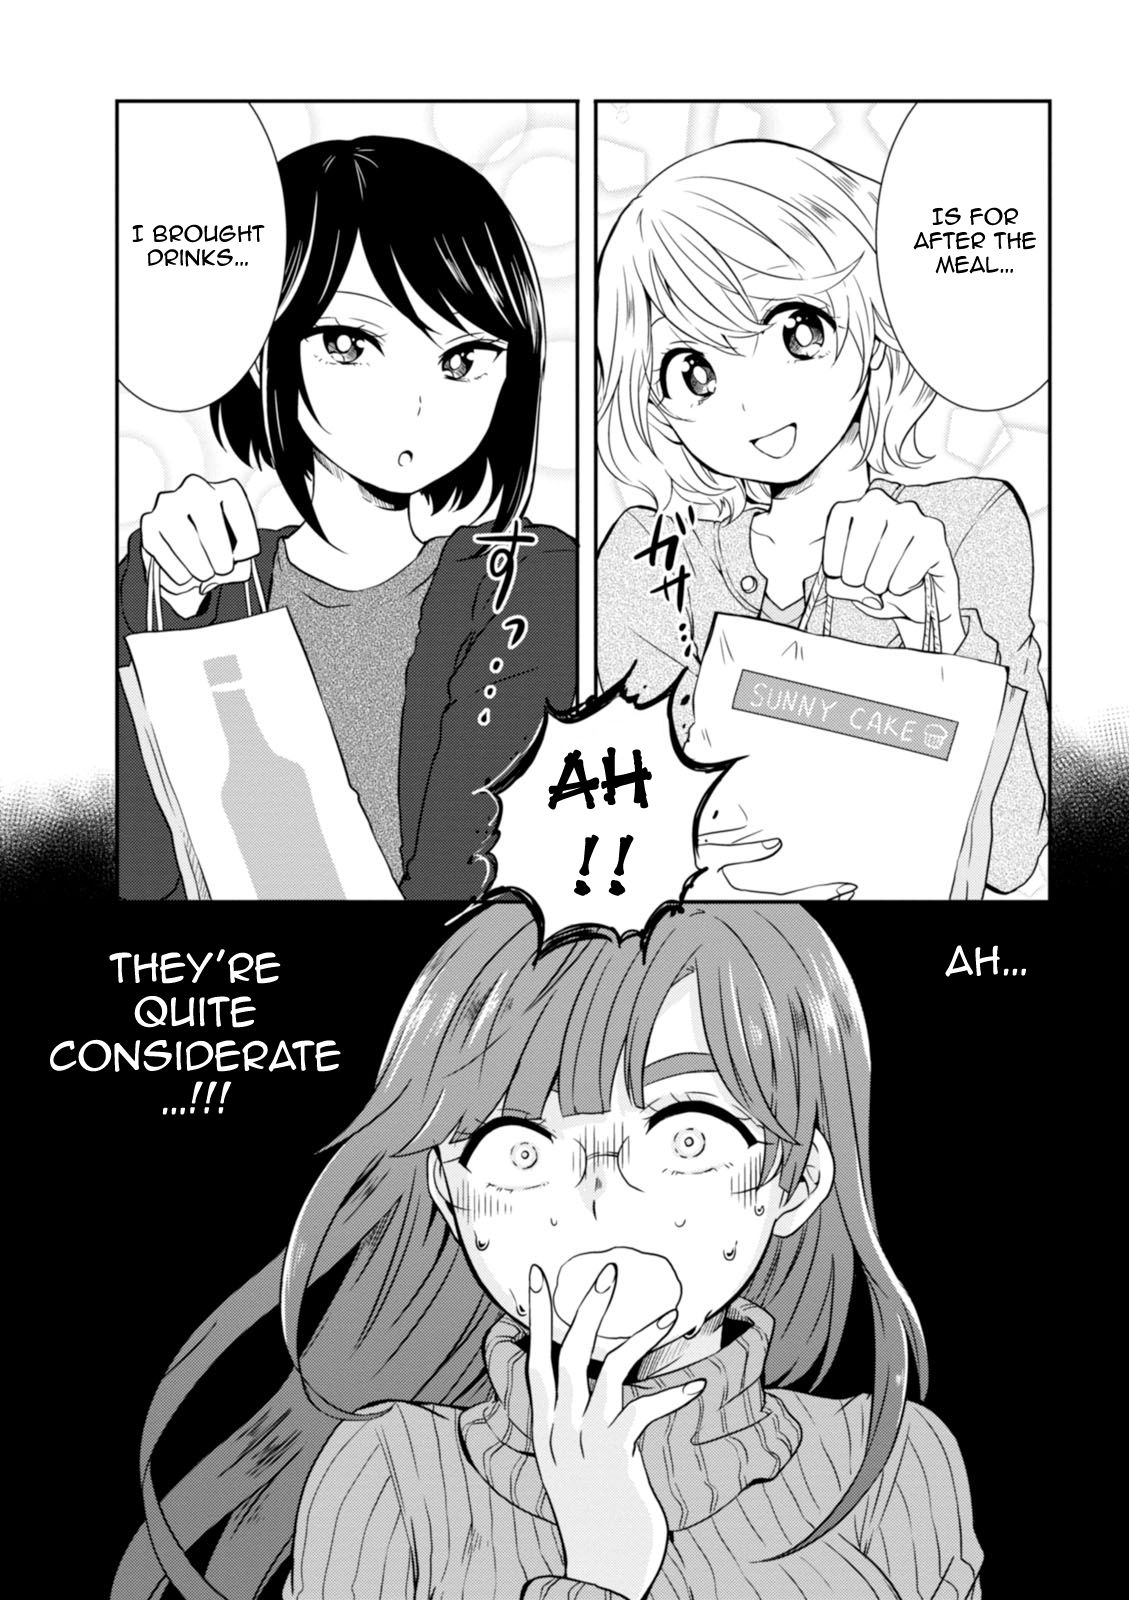 Hime no Dameshi Vol. 3 Ch. 22 Hime And Nabe Party